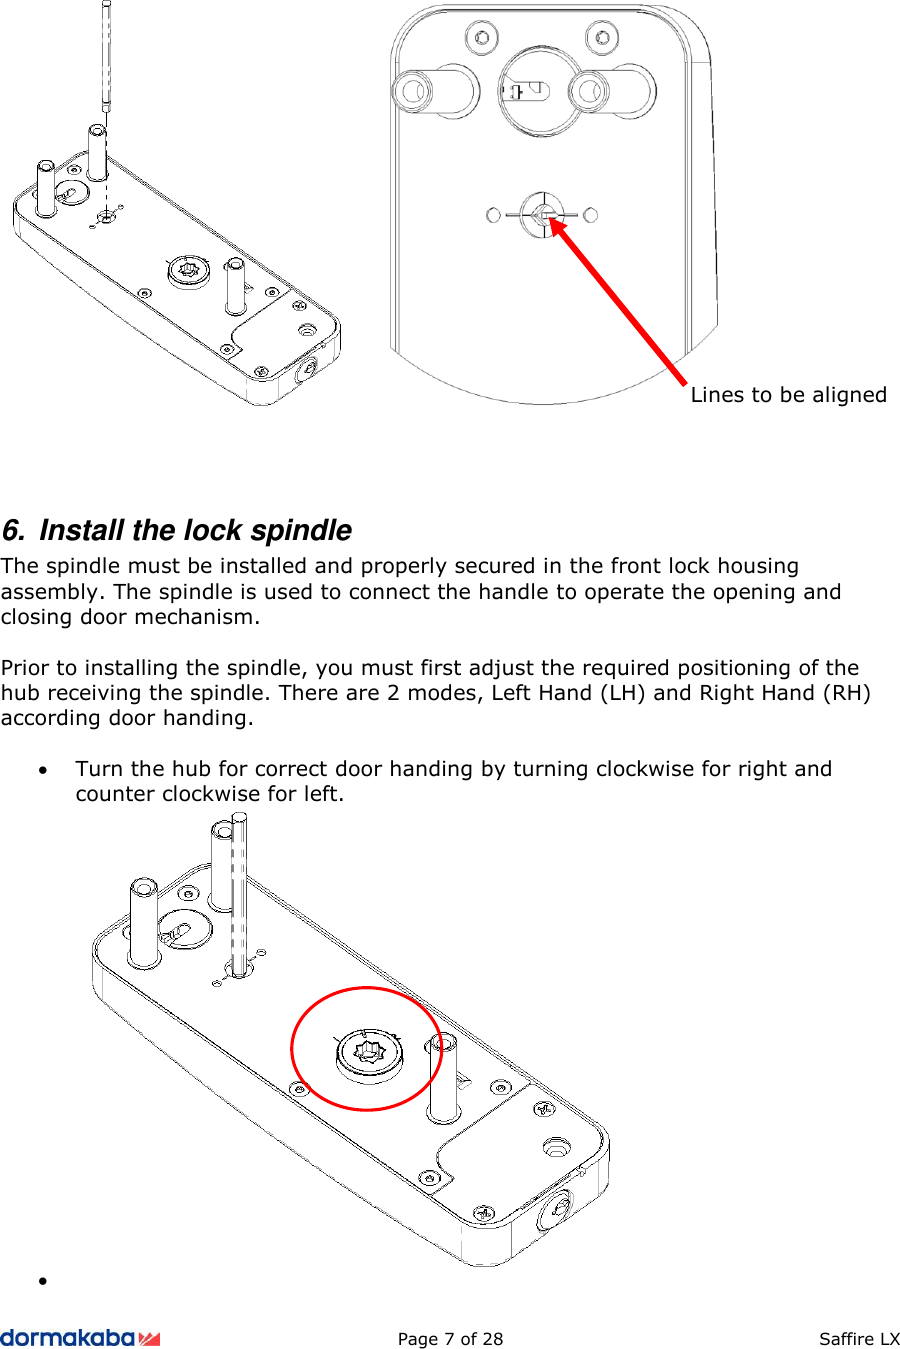          Page 7 of 28  Saffire LX                6.  Install the lock spindle  The spindle must be installed and properly secured in the front lock housing assembly. The spindle is used to connect the handle to operate the opening and closing door mechanism.  Prior to installing the spindle, you must first adjust the required positioning of the hub receiving the spindle. There are 2 modes, Left Hand (LH) and Right Hand (RH) according door handing.  • Turn the hub for correct door handing by turning clockwise for right and counter clockwise for left. •  Lines to be aligned 